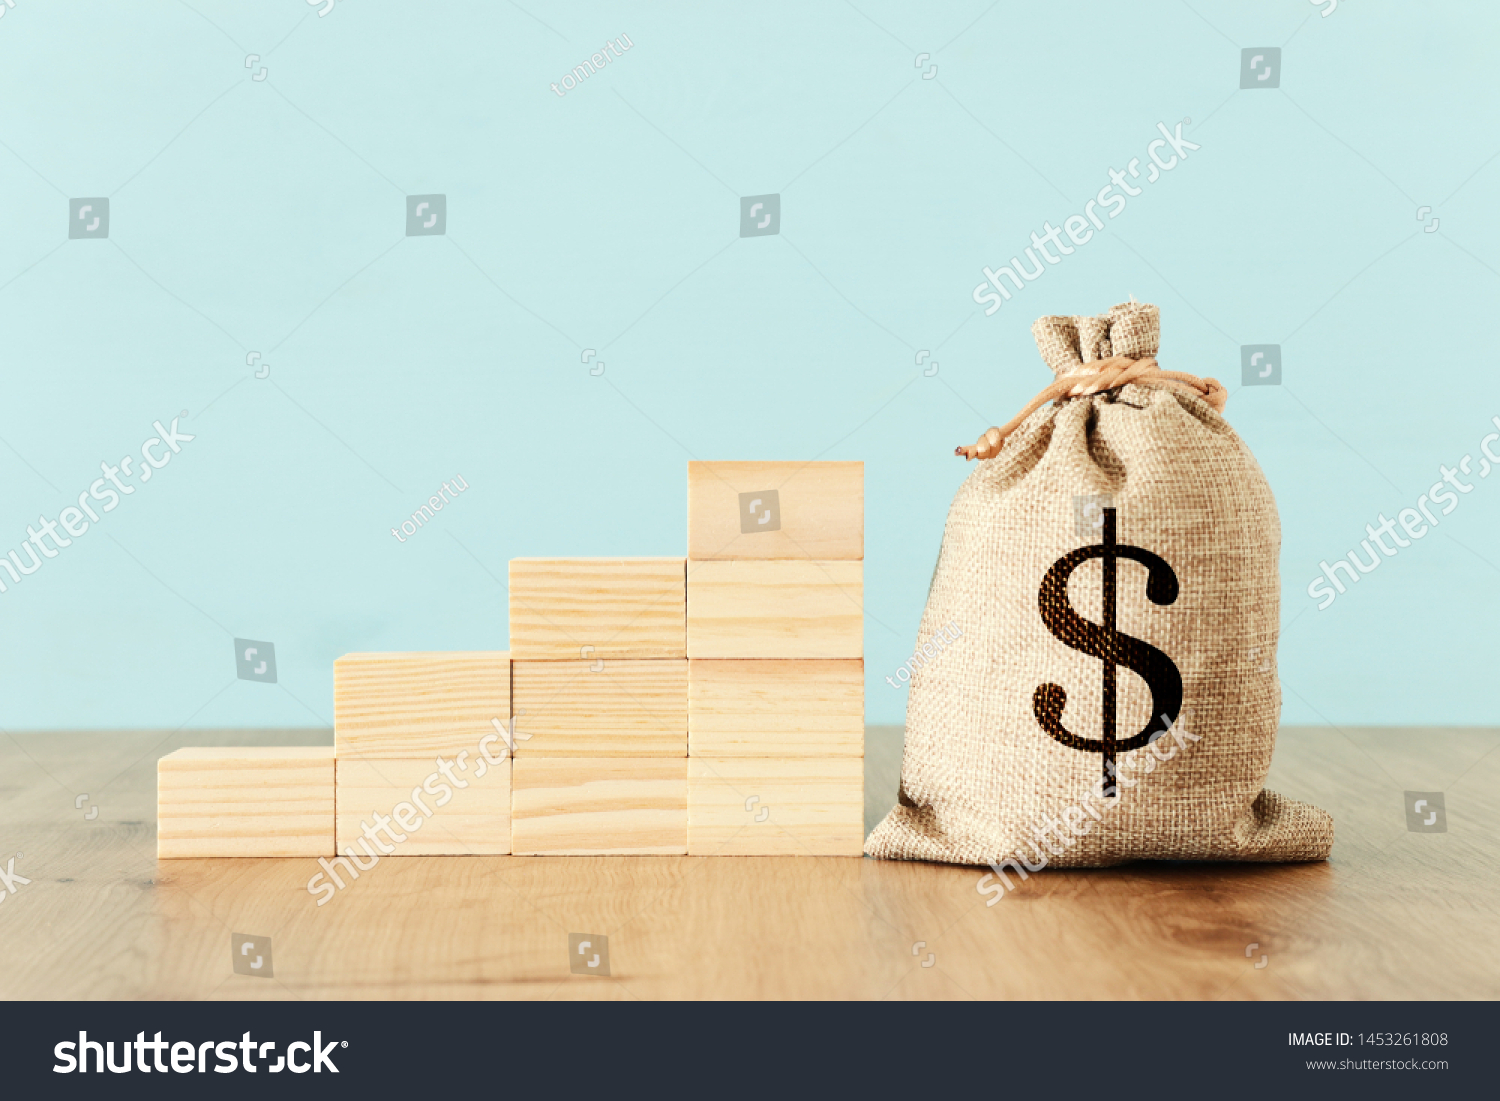 business image of a sack with money over wooden desk #1453261808